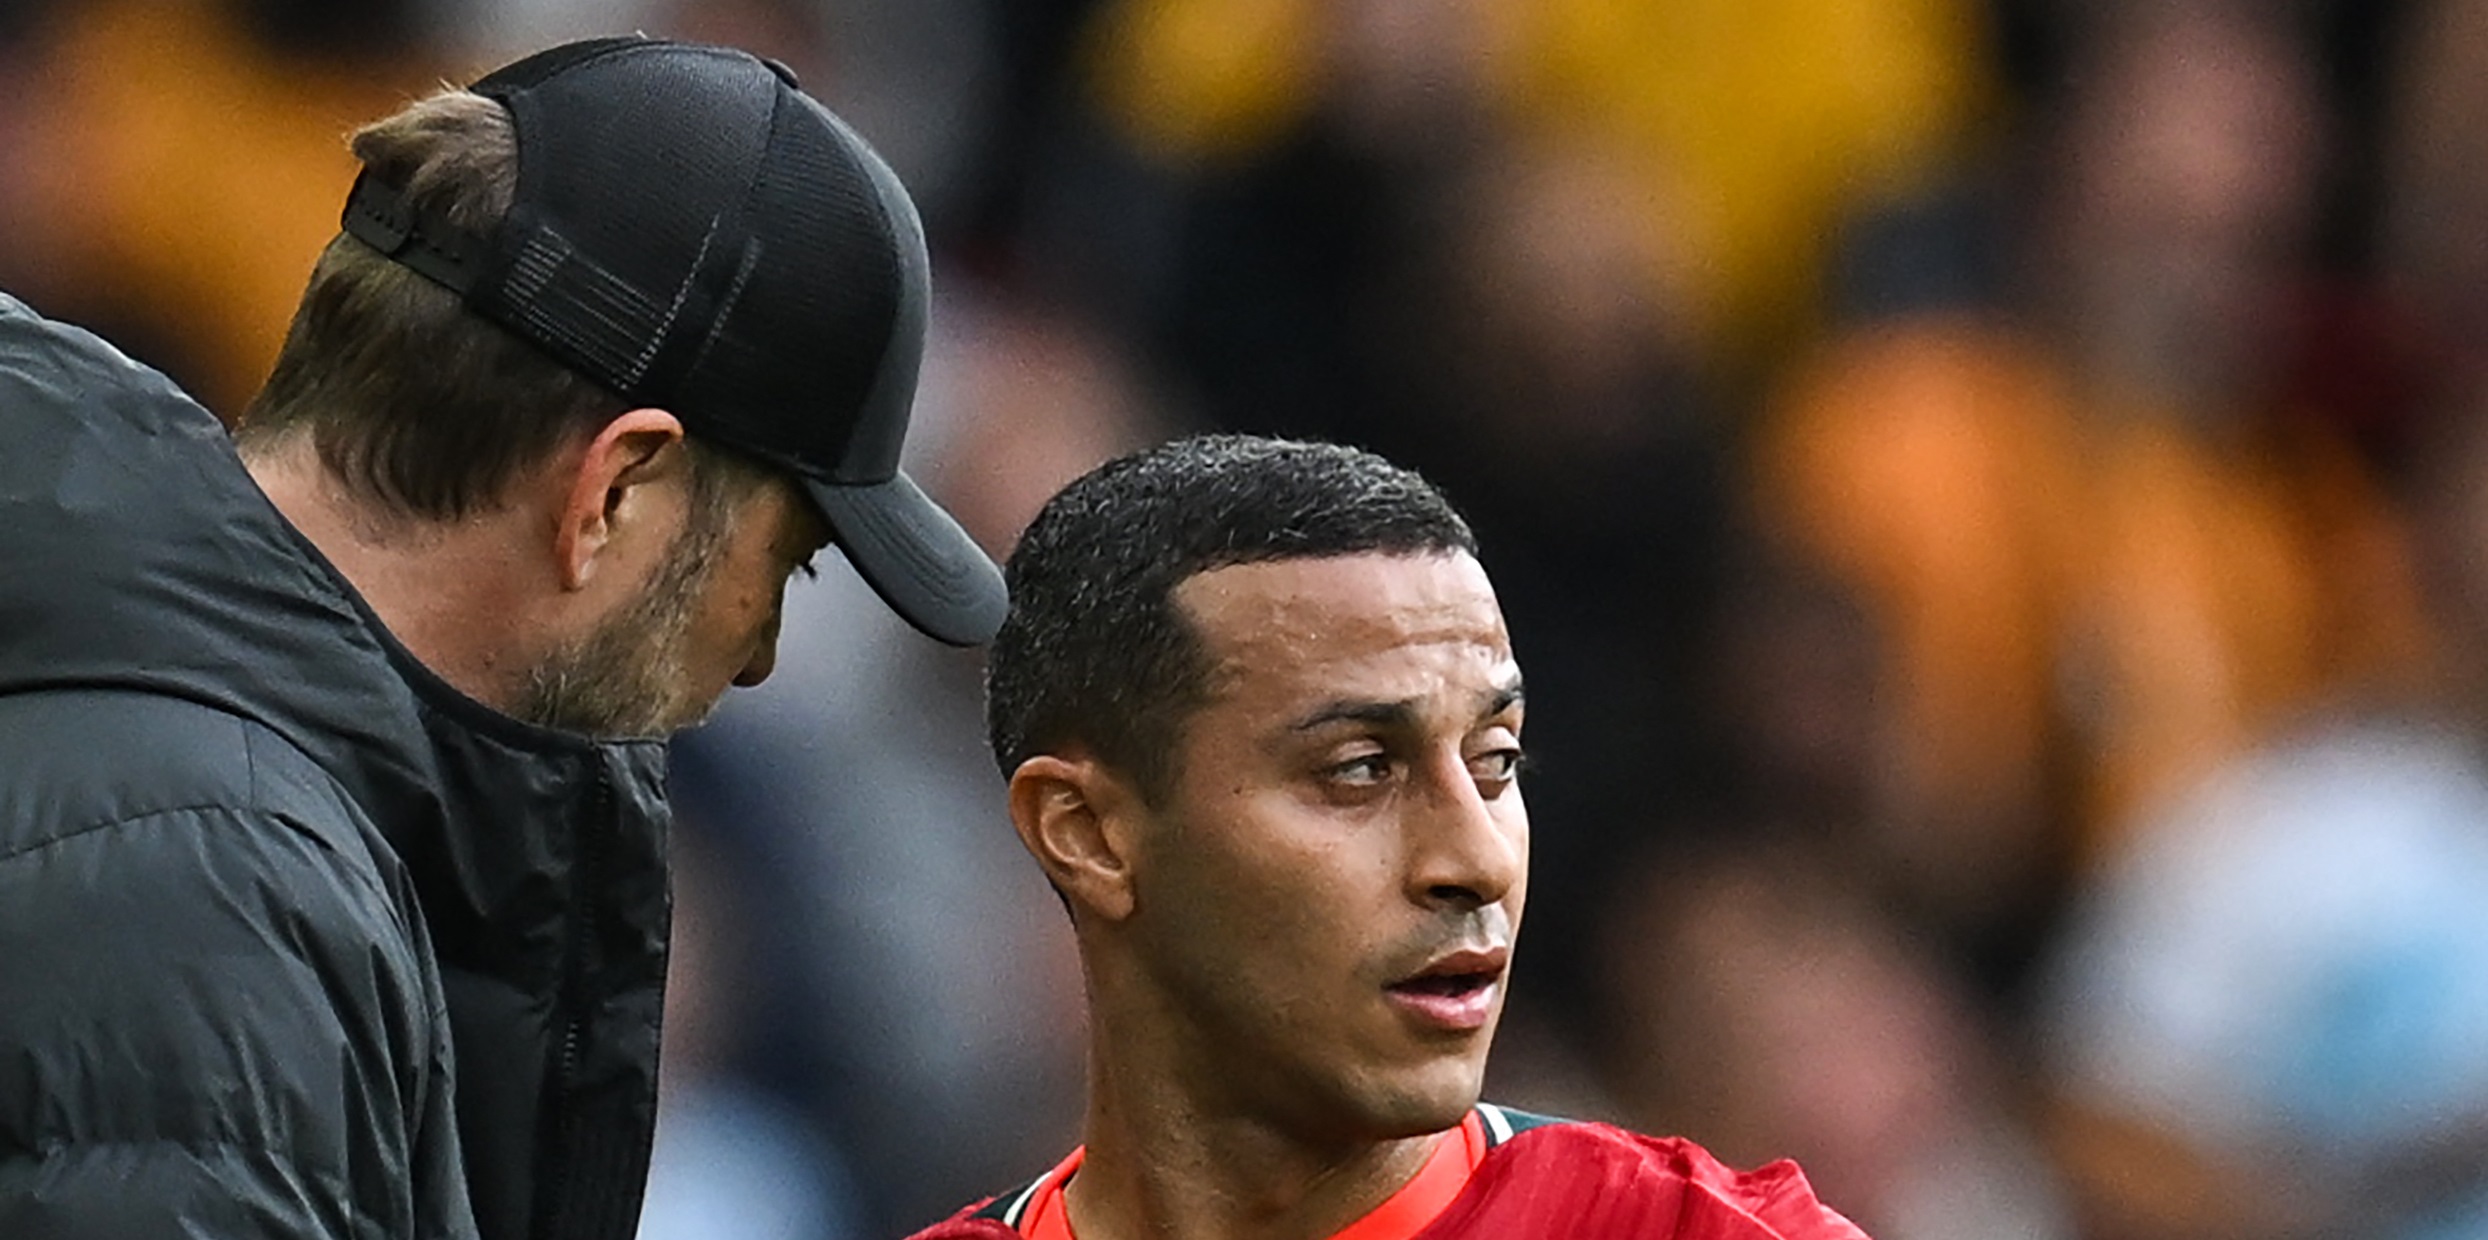 Jose Enrique urges Liverpool to sign 30-year-old midfielder ‘more offensive’ than Thiago Alcantara